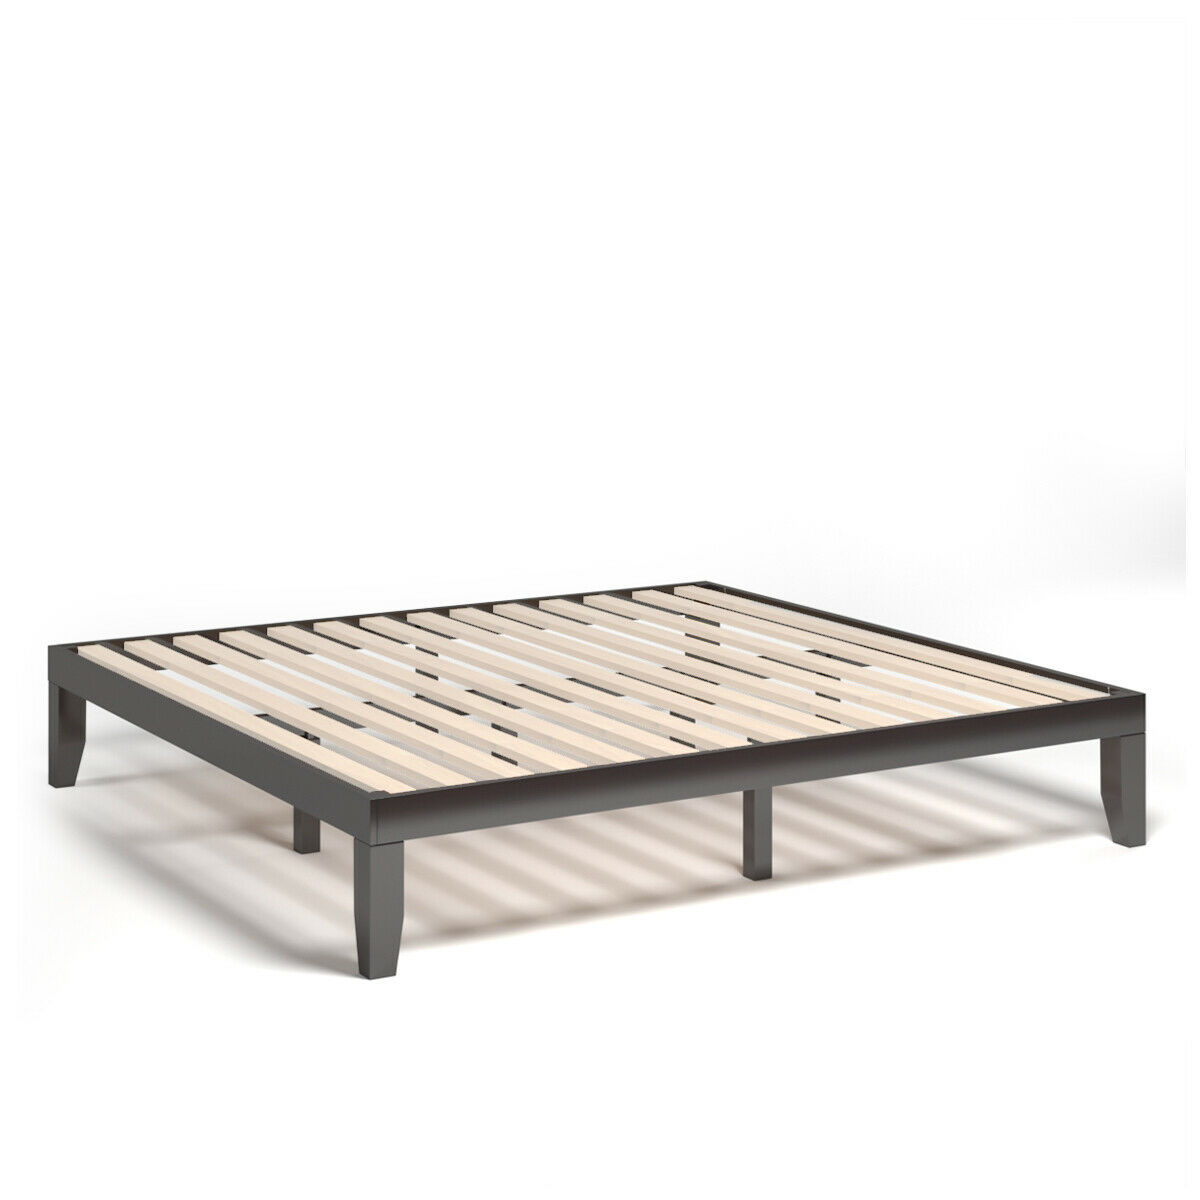 Gymax King Size 14 Wooden Bed Frame, King Bed Frame Support